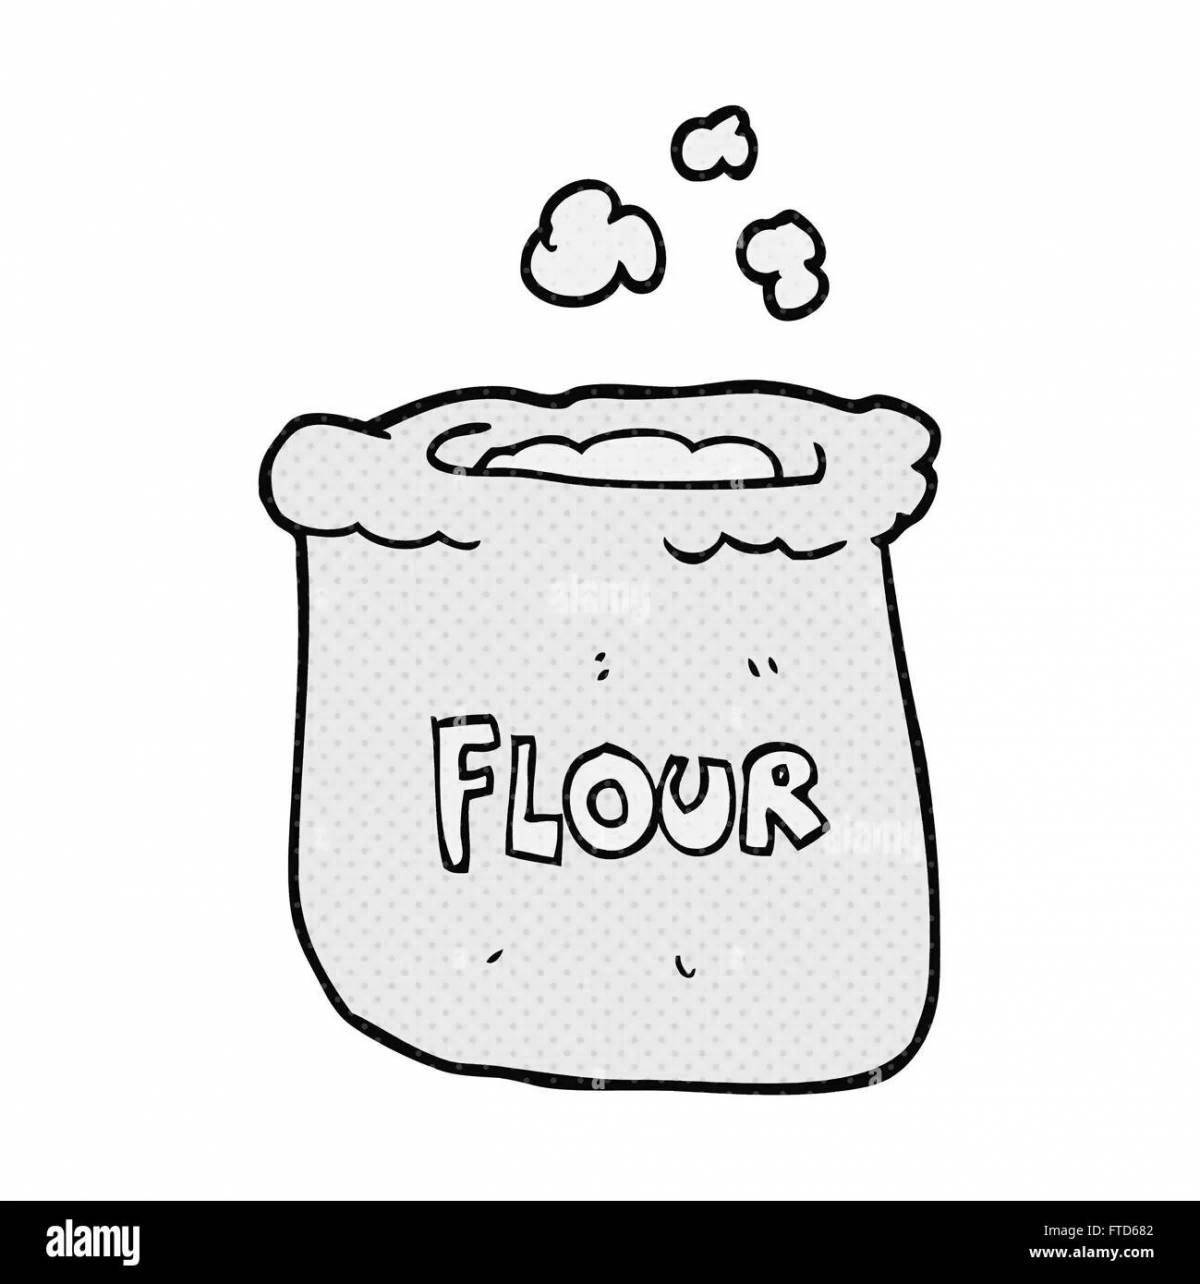 Shining Flour Coloring Page for Toddlers